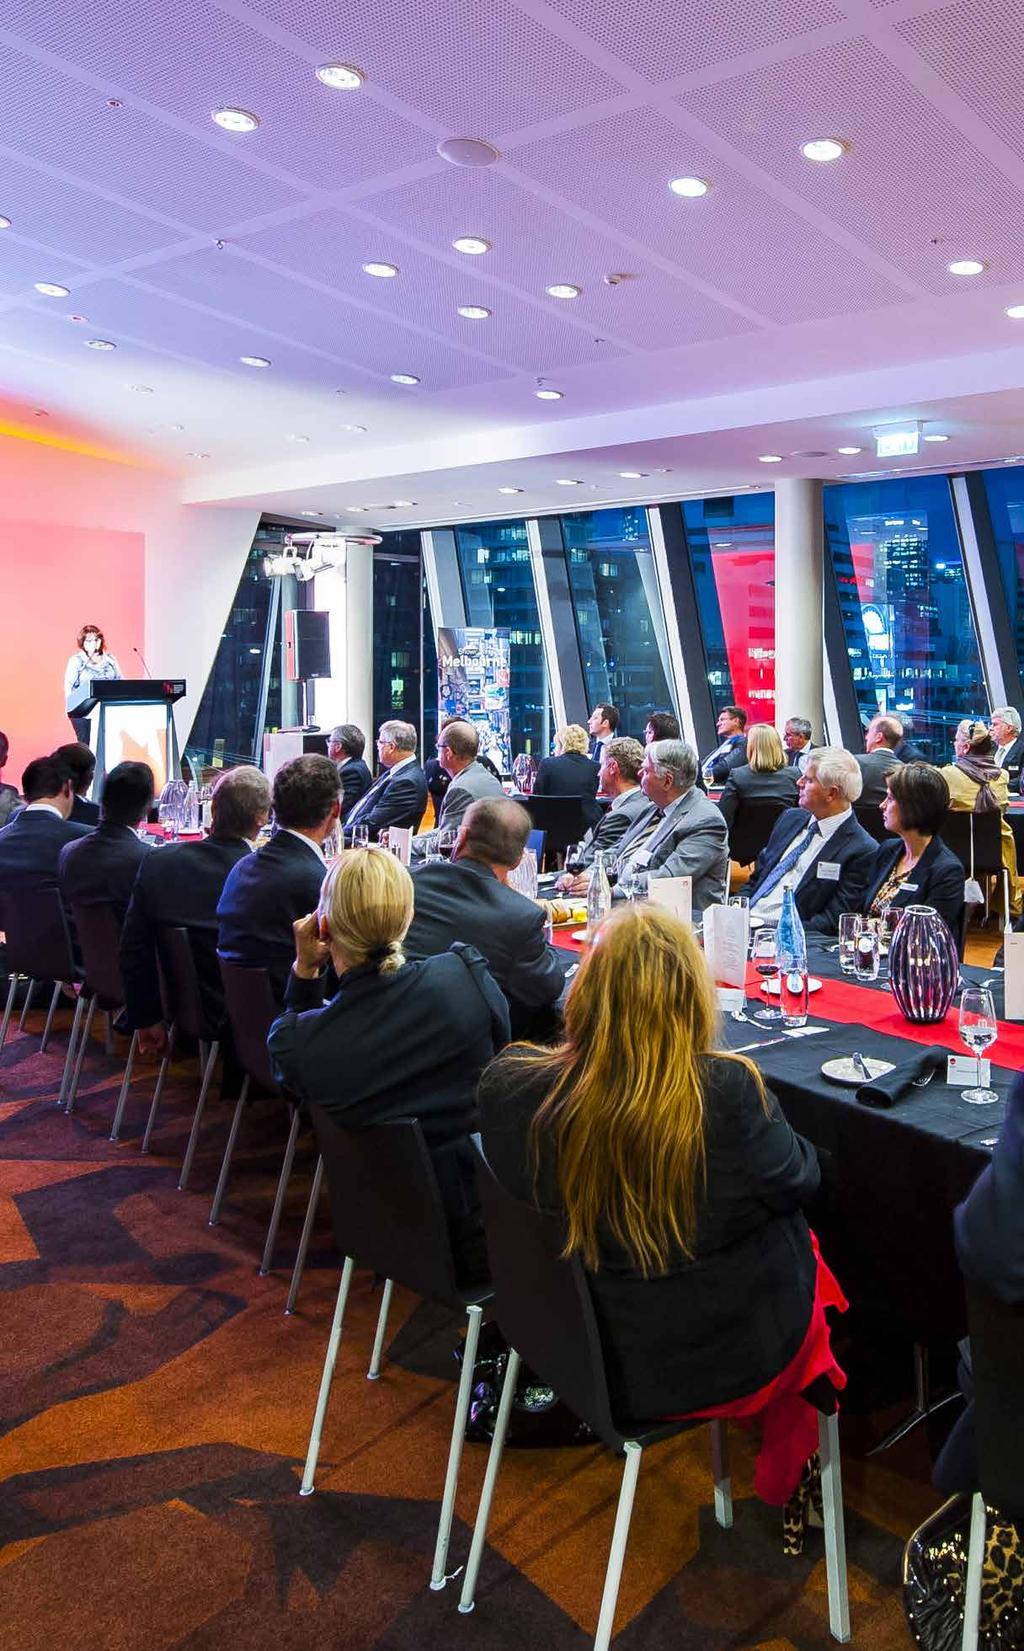 MCB S CORE FUNCTIONS NATIONAL AND INTERNATIONAL CONVENTION BIDDING To ensure Melbourne and regional Victoria secure lucrative business events from local and global association clients INCENTIVE AND